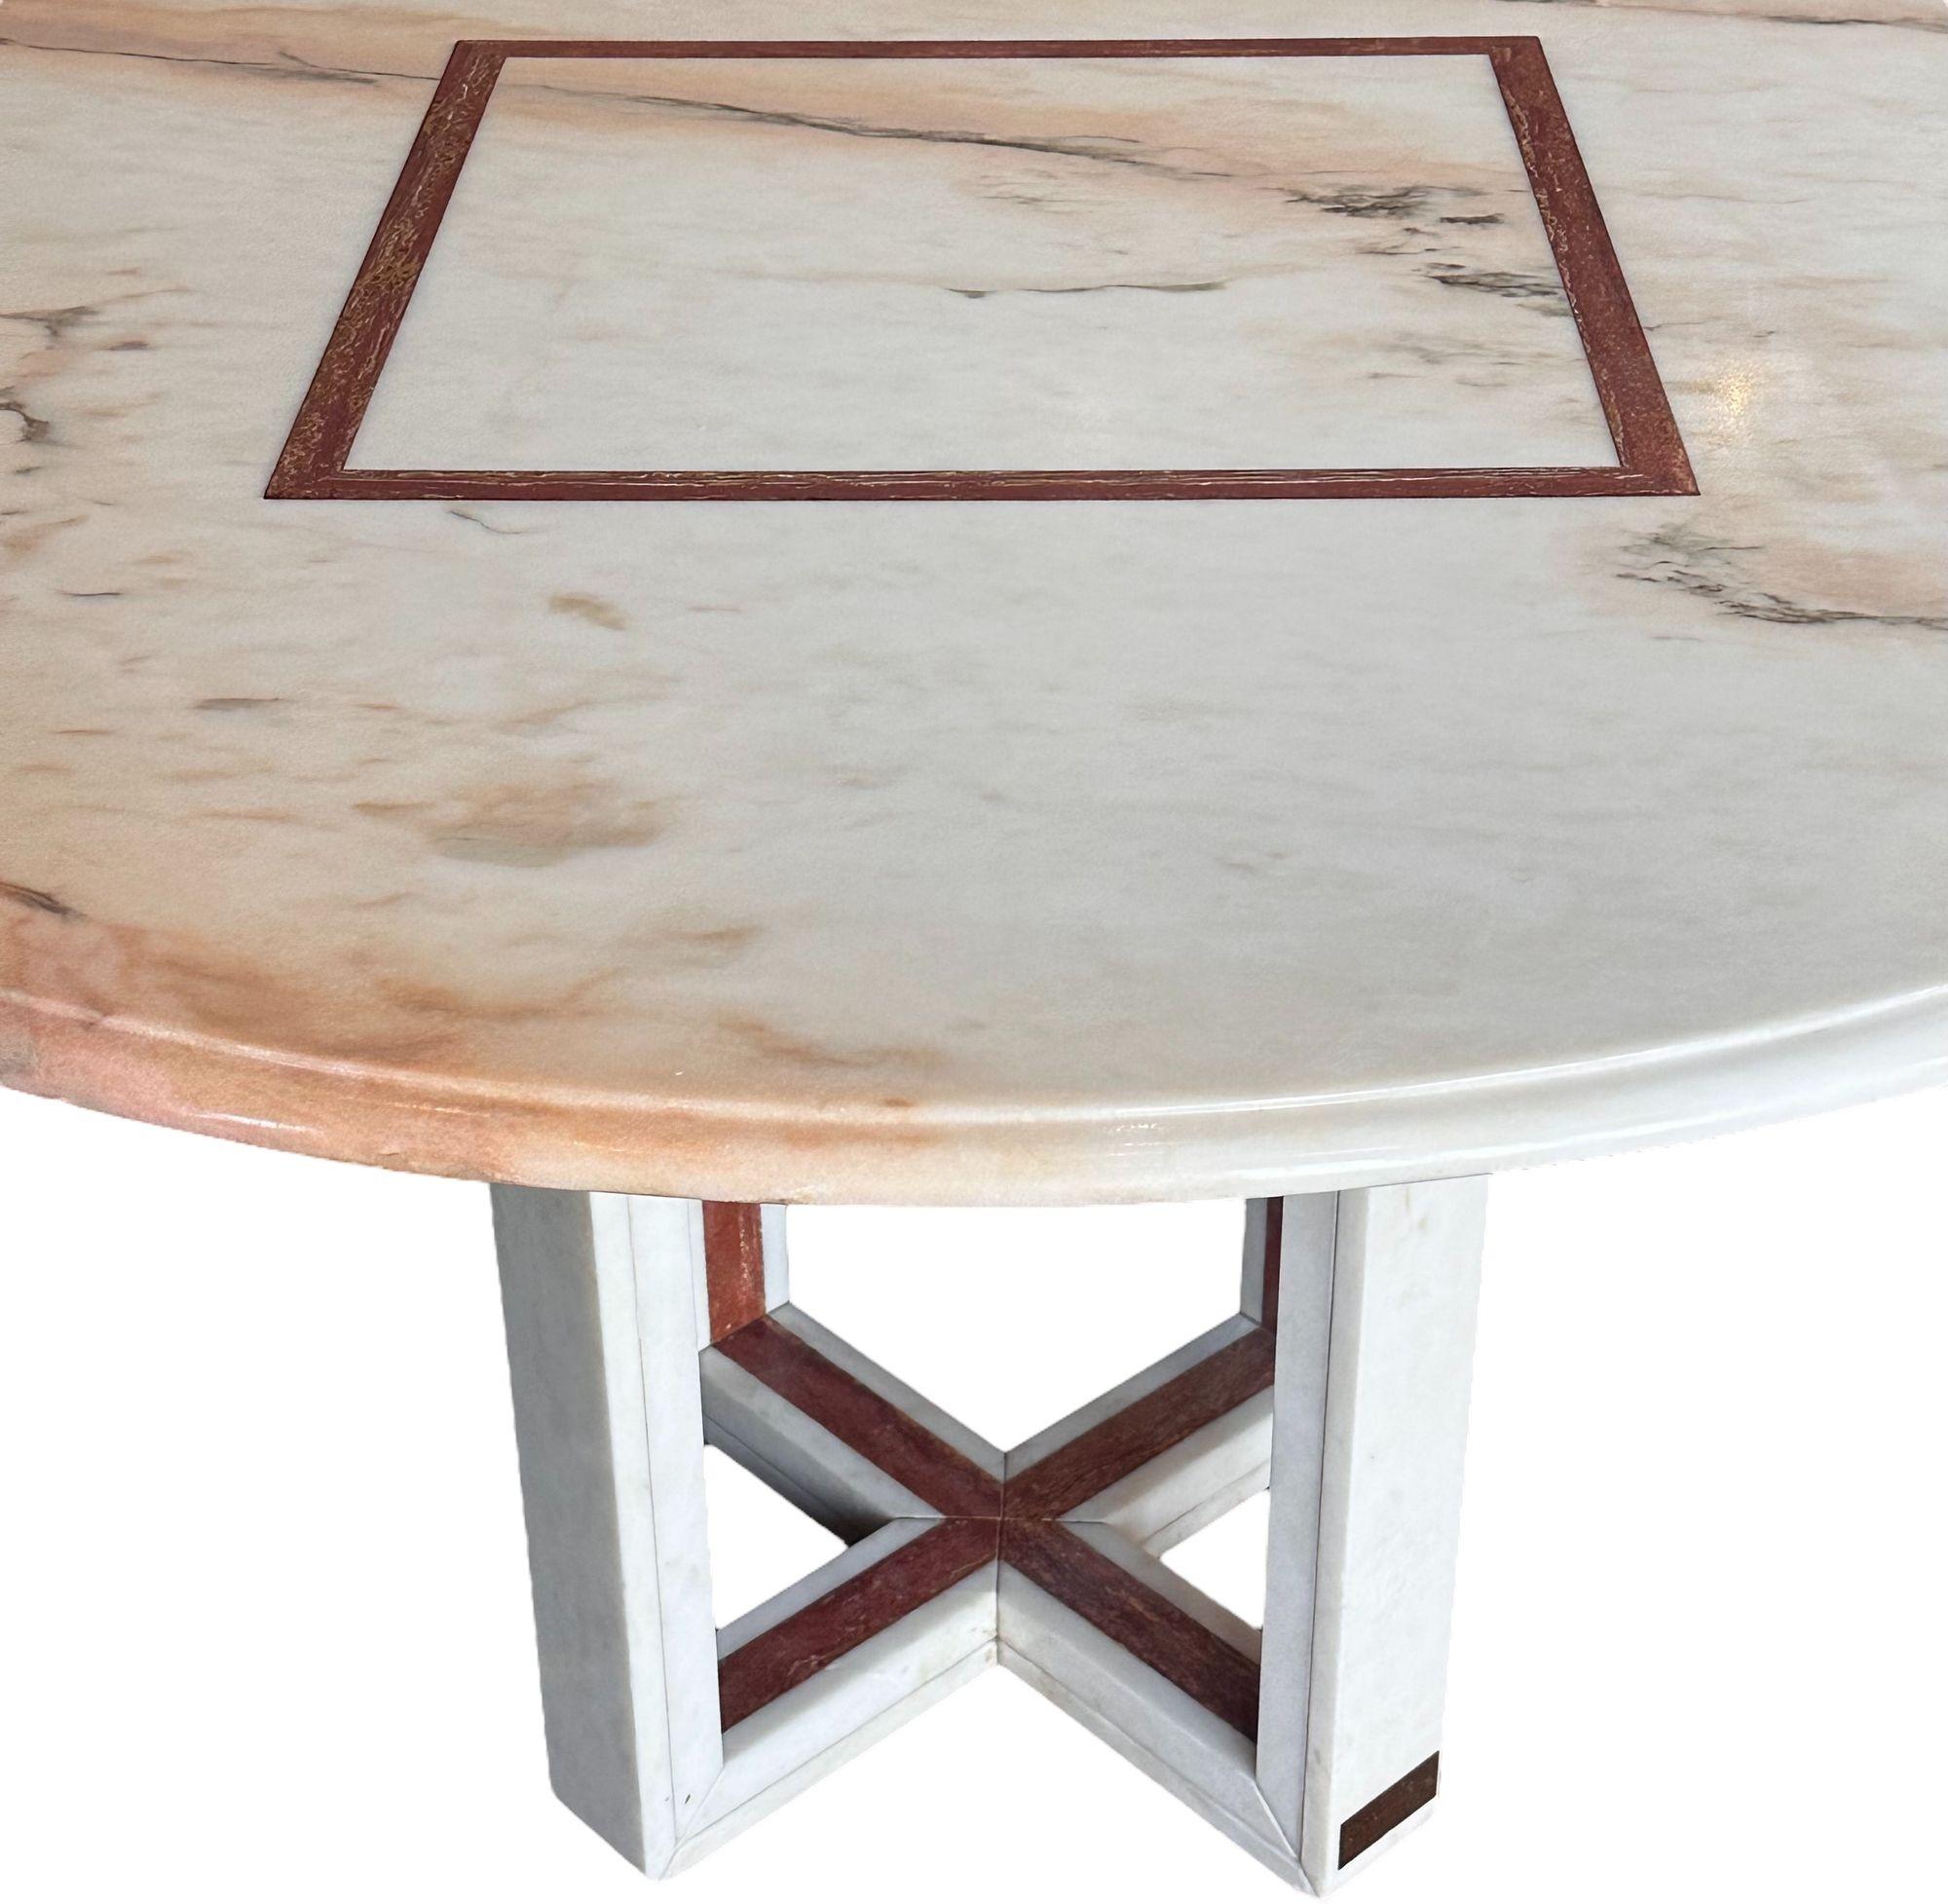 French Red and White Marble Center Dining Table, 1960. Cruciform Marble base and brass signature plate as shown in picture.
Measures 52